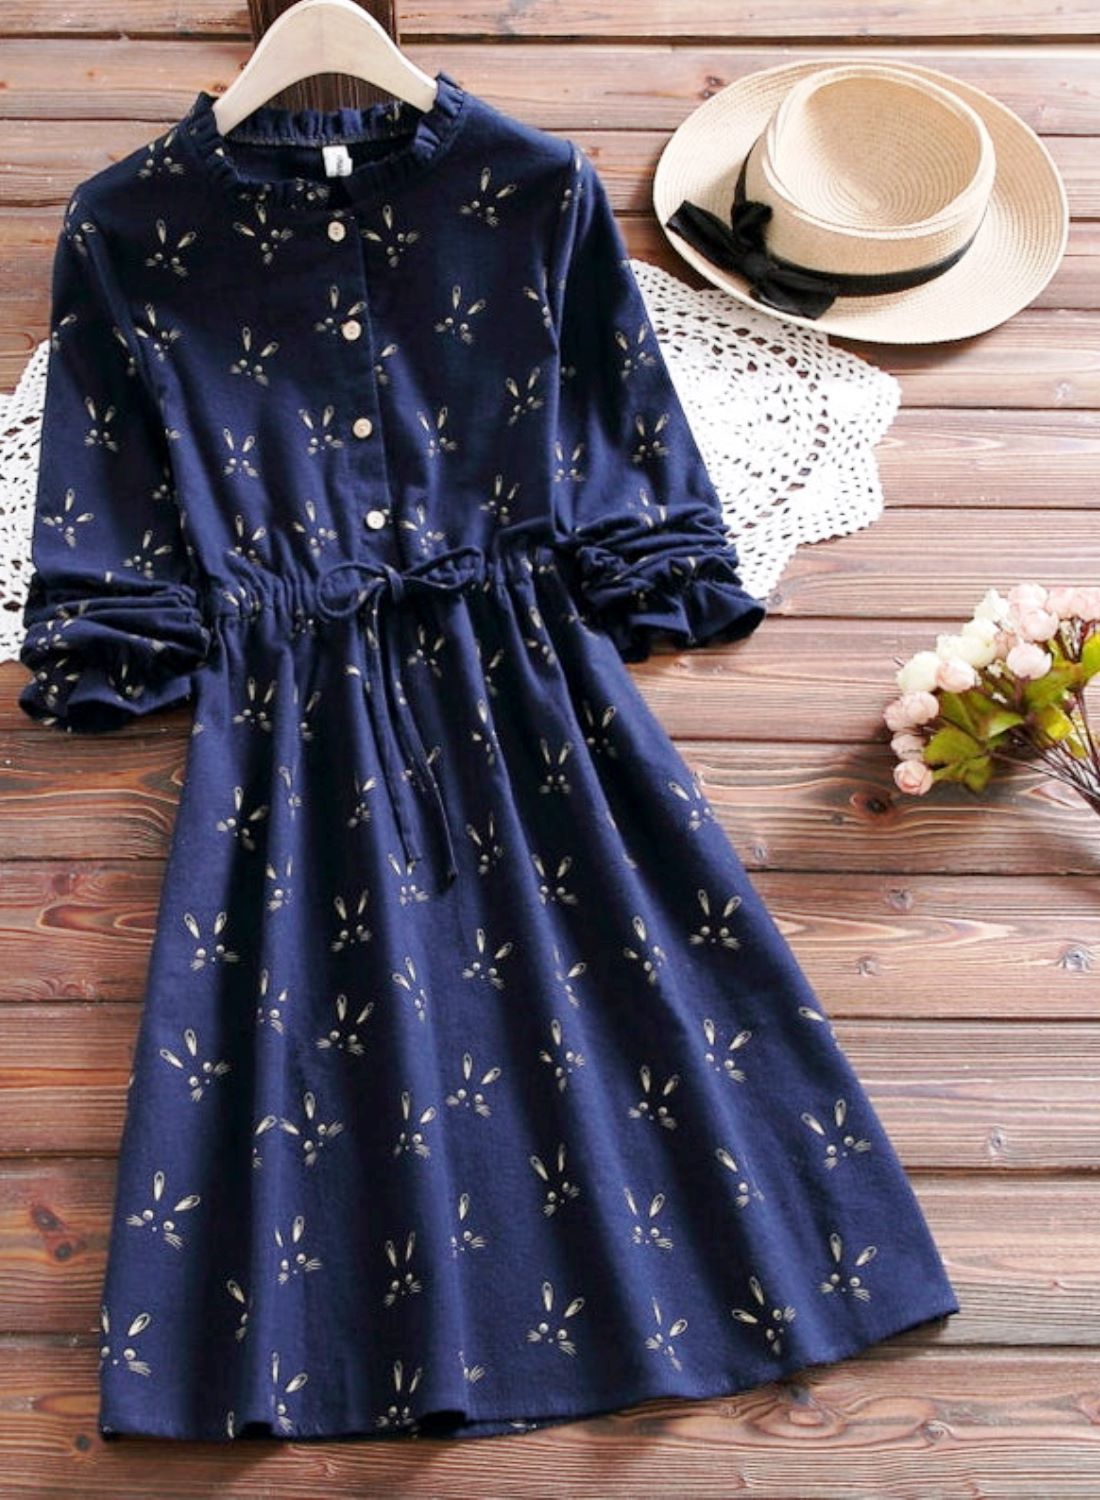 Vintage Style Long Sleeved Cotton Dress